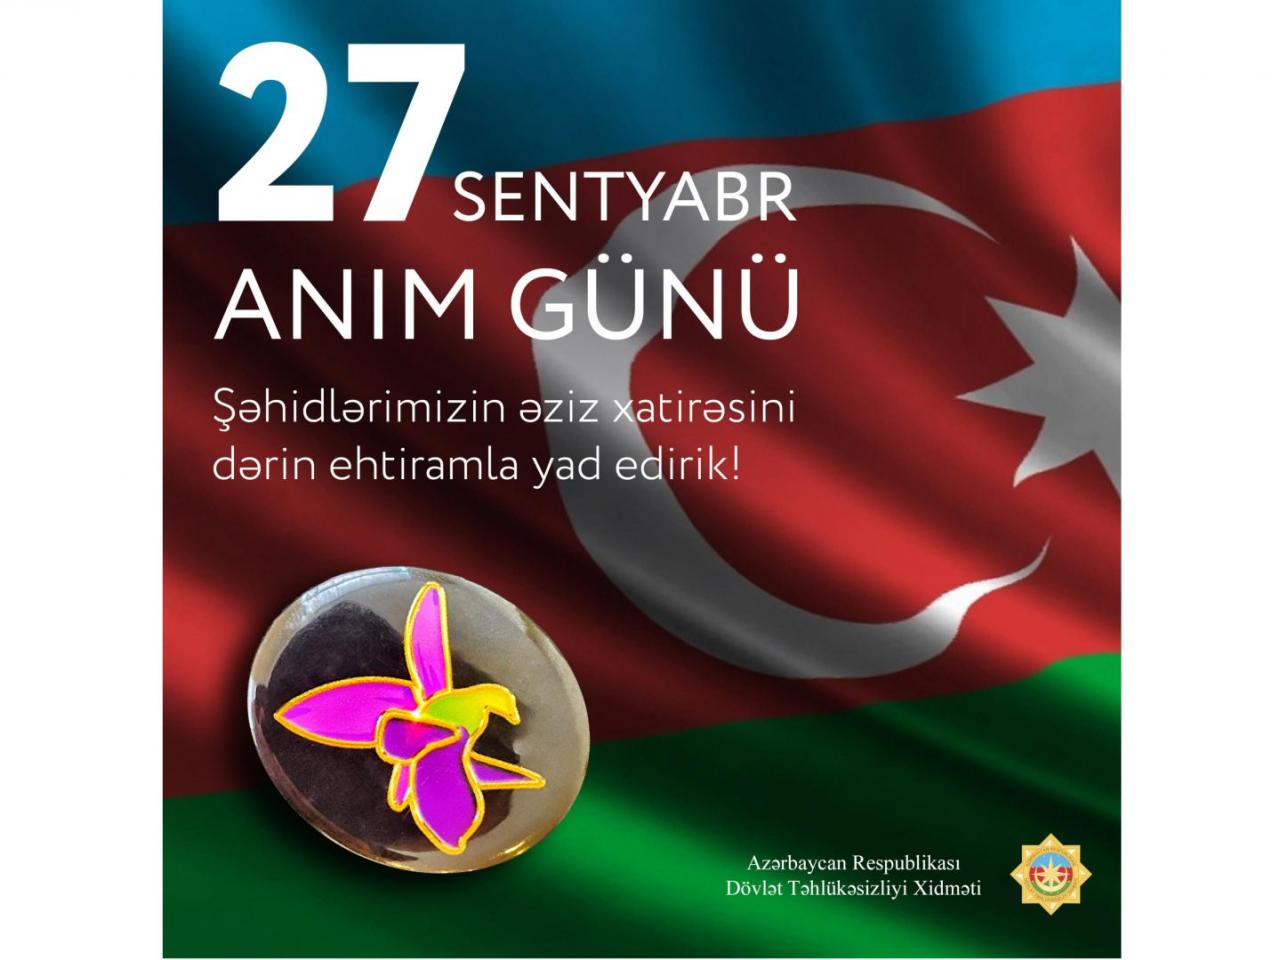 Azerbaijan's State Security Service shares video dedicated to Remembrance Day [VIDEO]